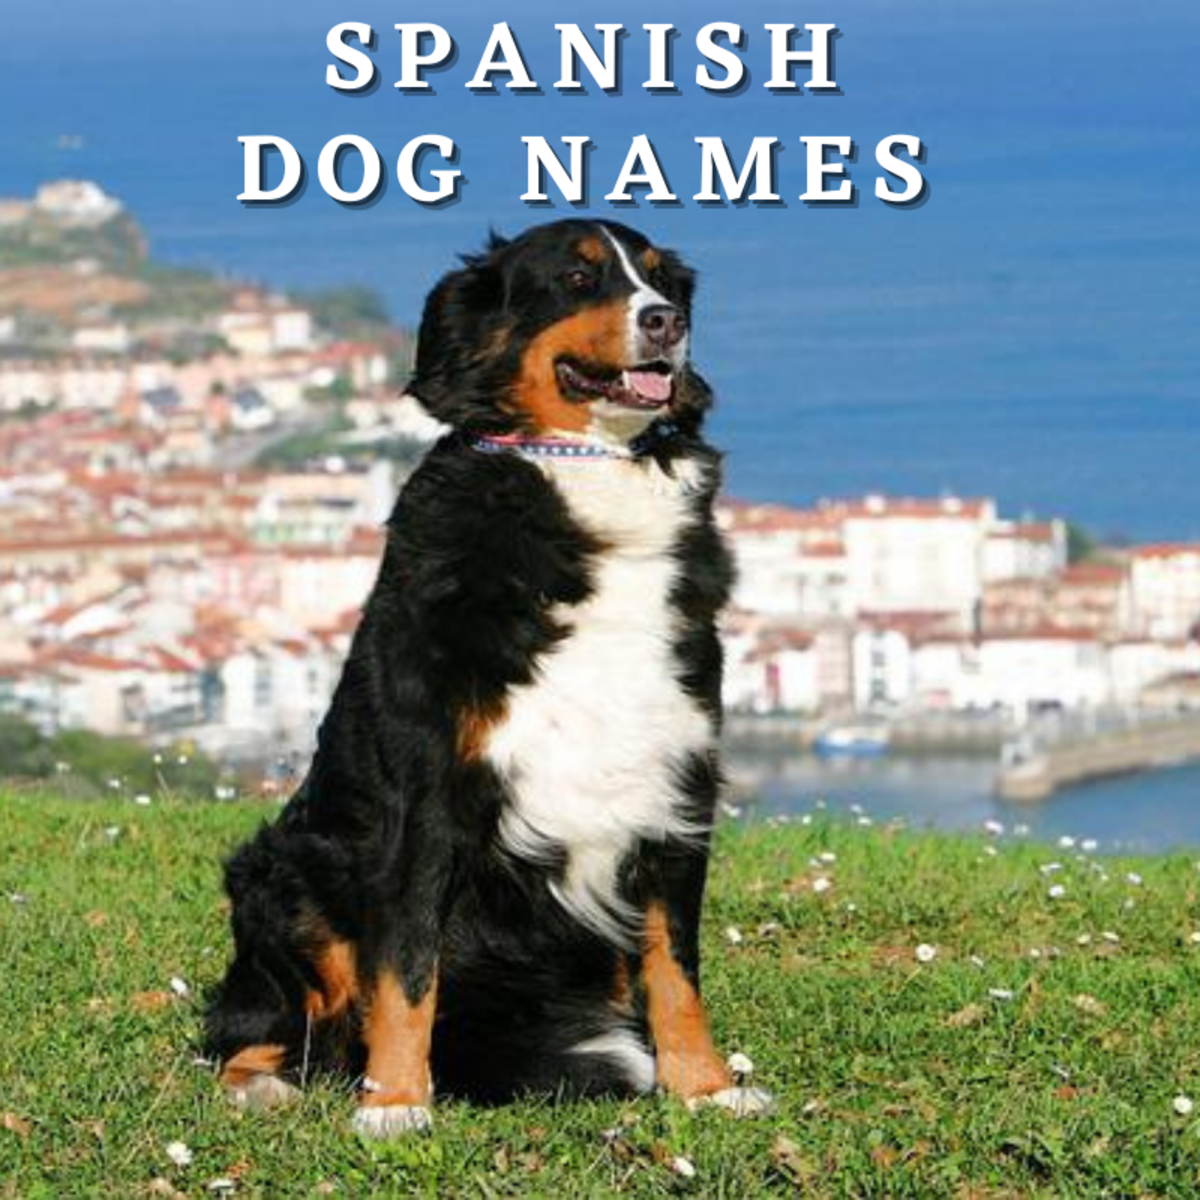 200+ Spanish Dog Names (With Meanings)